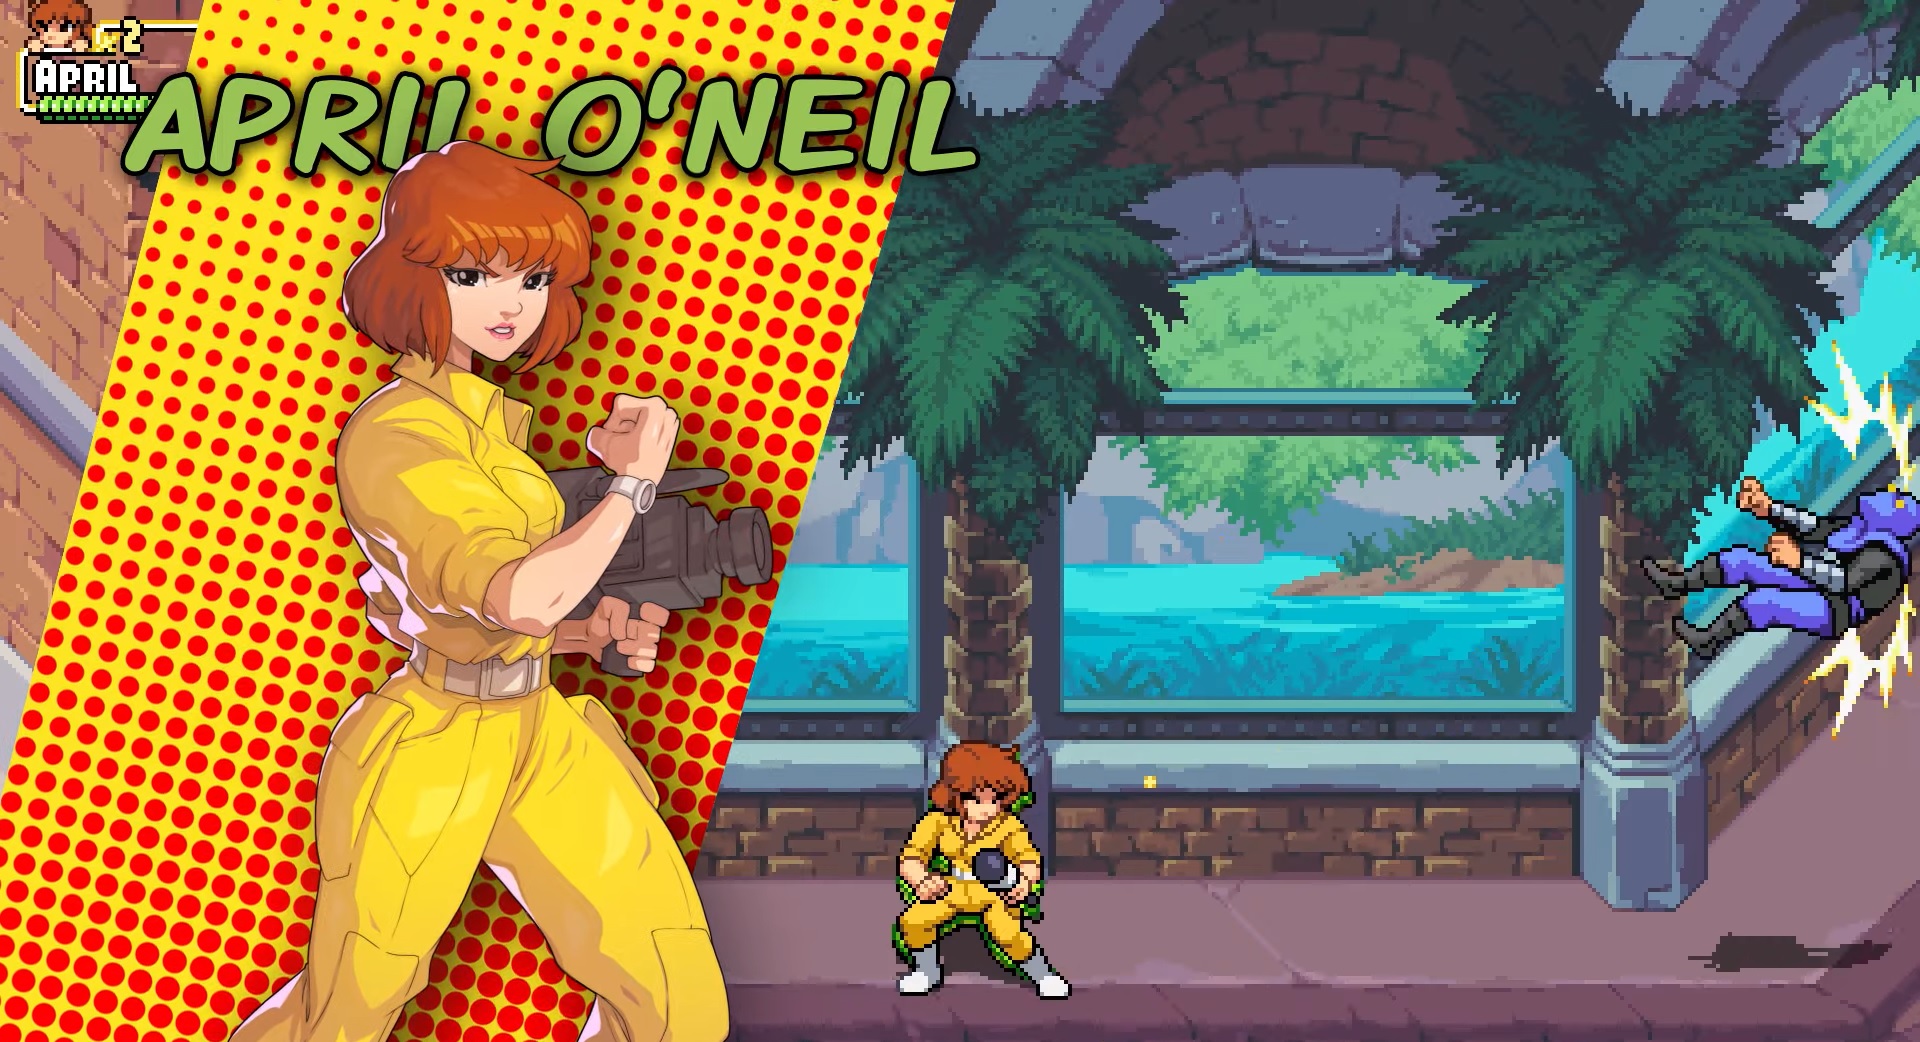 Play as April O’Neil in the new TMNT game